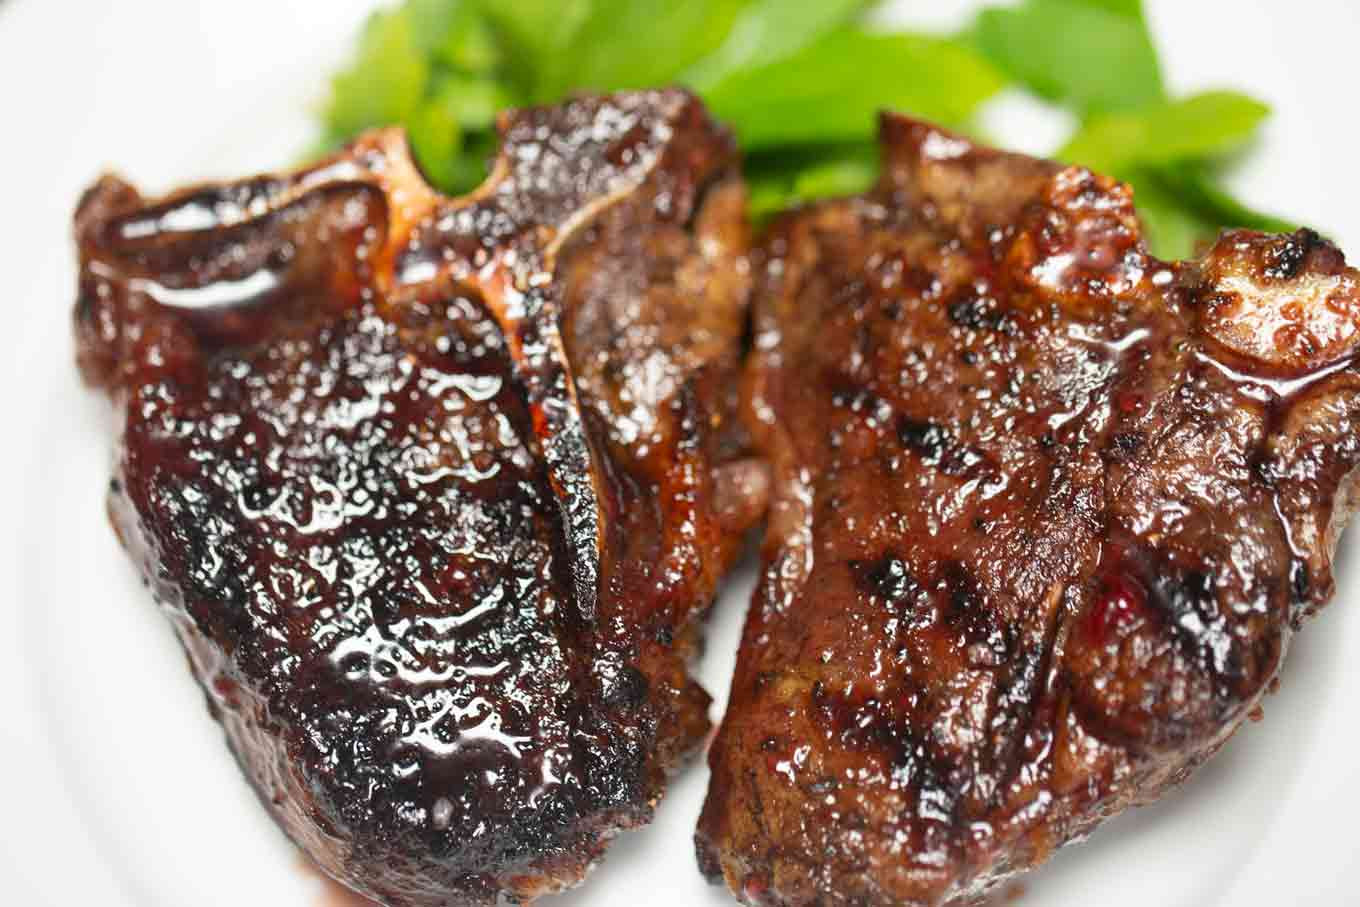 Red Wine Sauces For Lamb
 Lamb Chops in Red Wine Sauce Our Jewish Kitchen